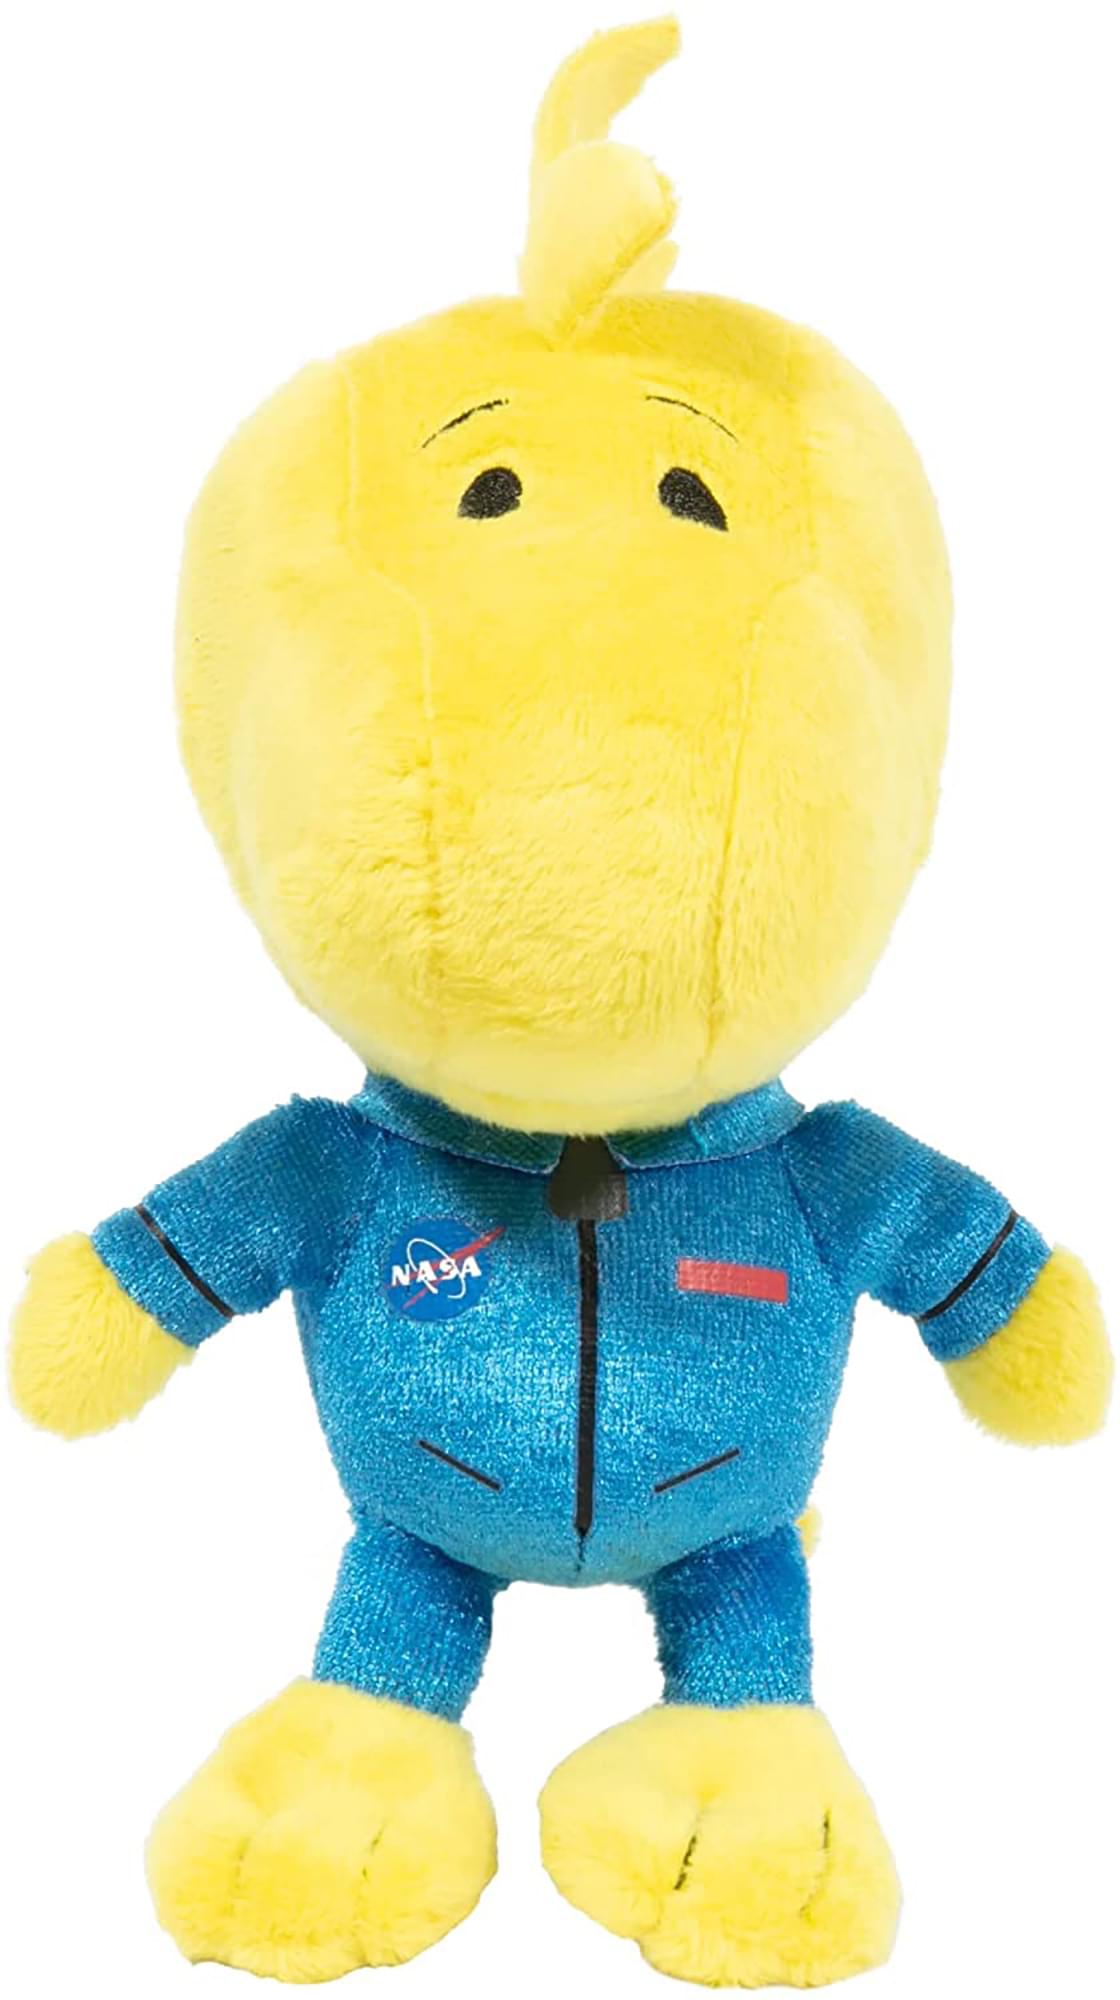 Snoopy in Space 7.5 inch Plush Woodstock in Blue Nasa Suit